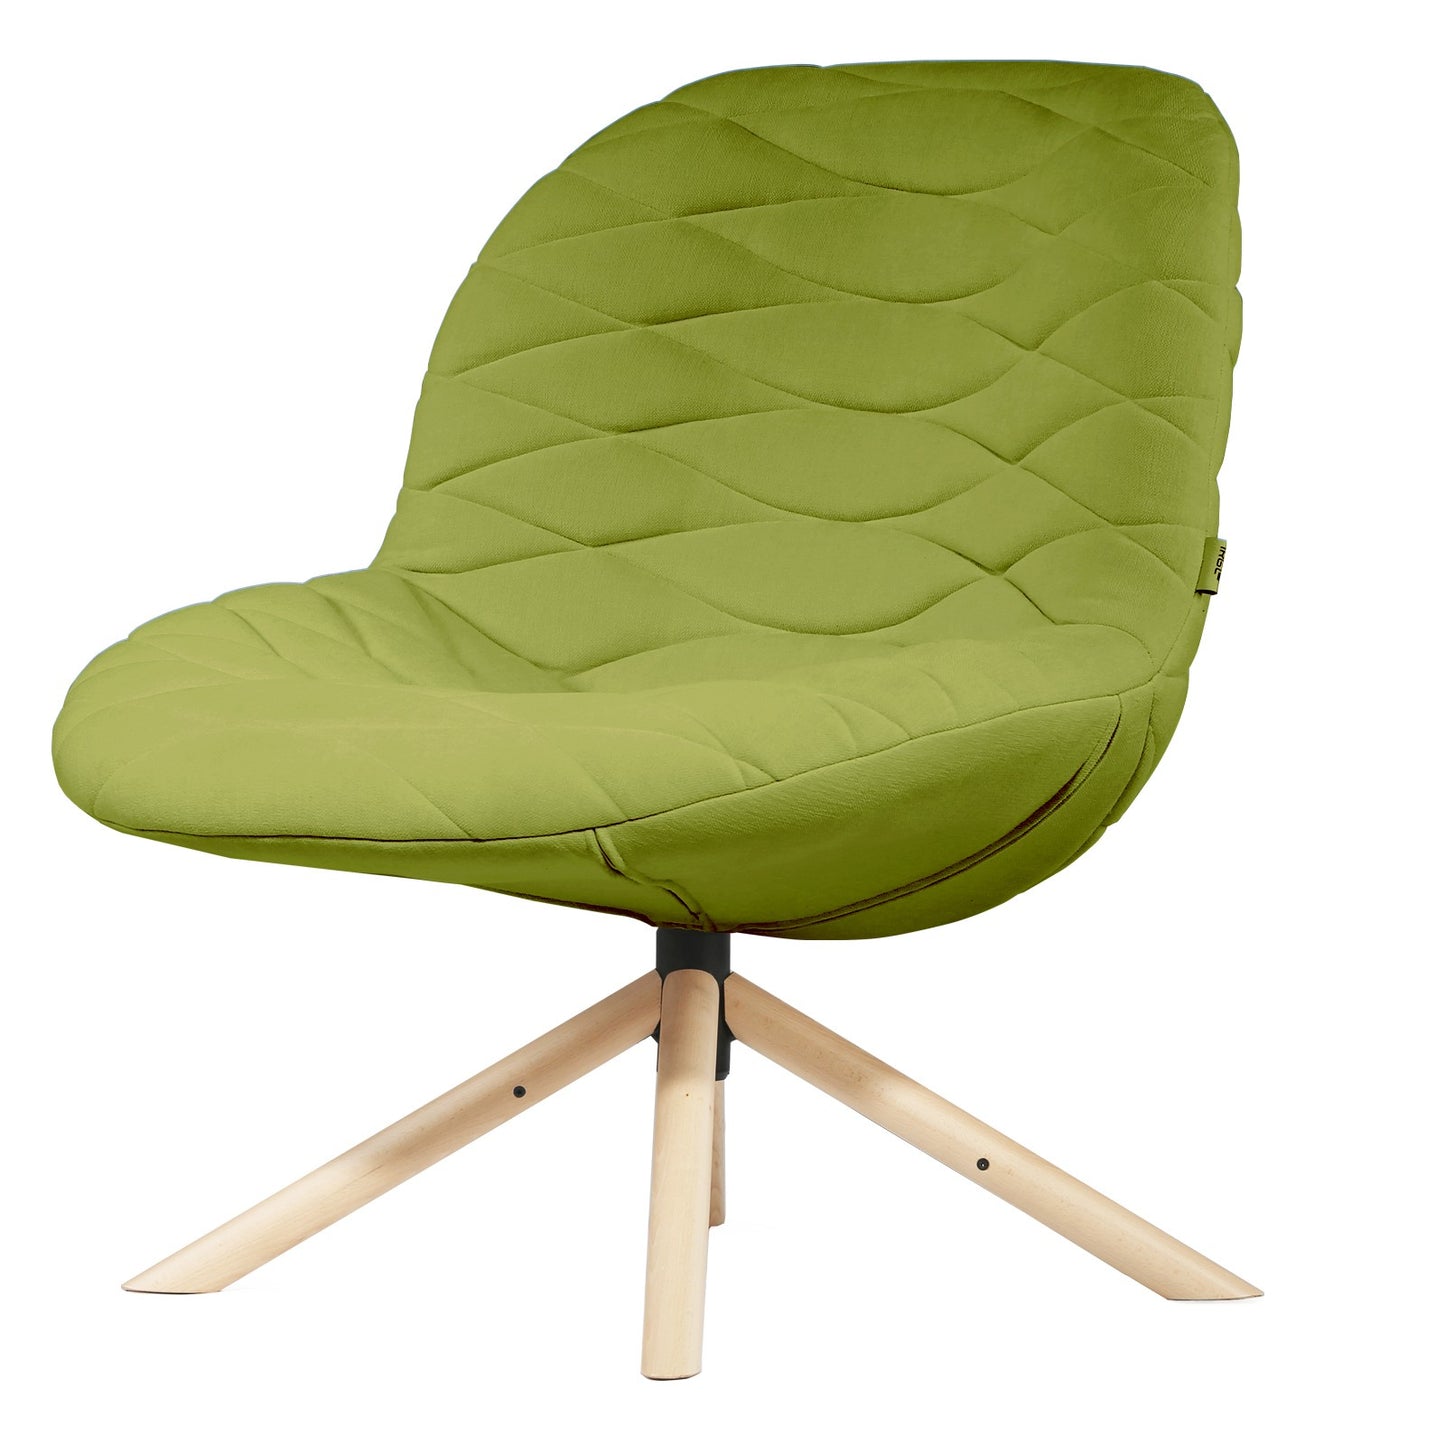 Lounge chair Mannequin Lounge 01 - Green